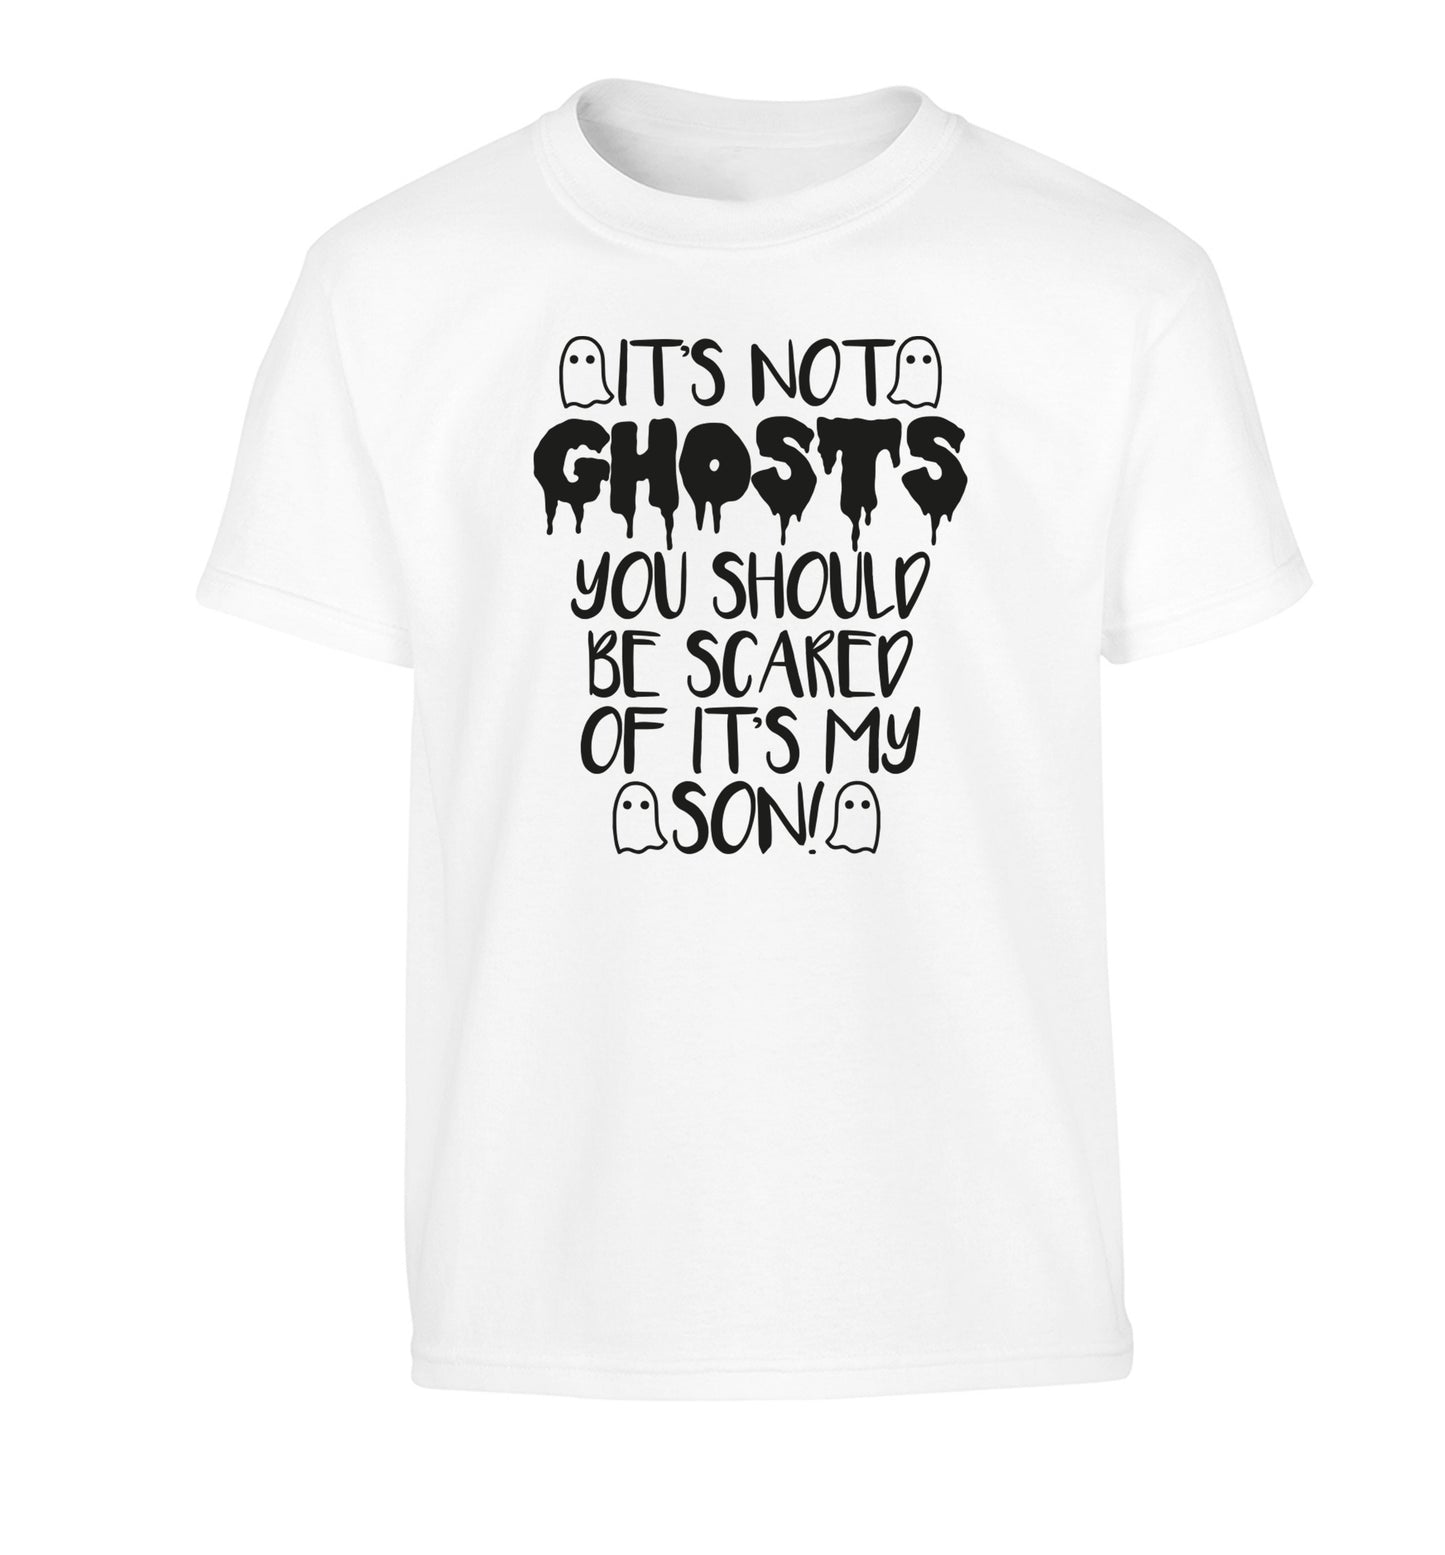 It's not ghosts you should be scared of it's my son! Children's white Tshirt 12-14 Years